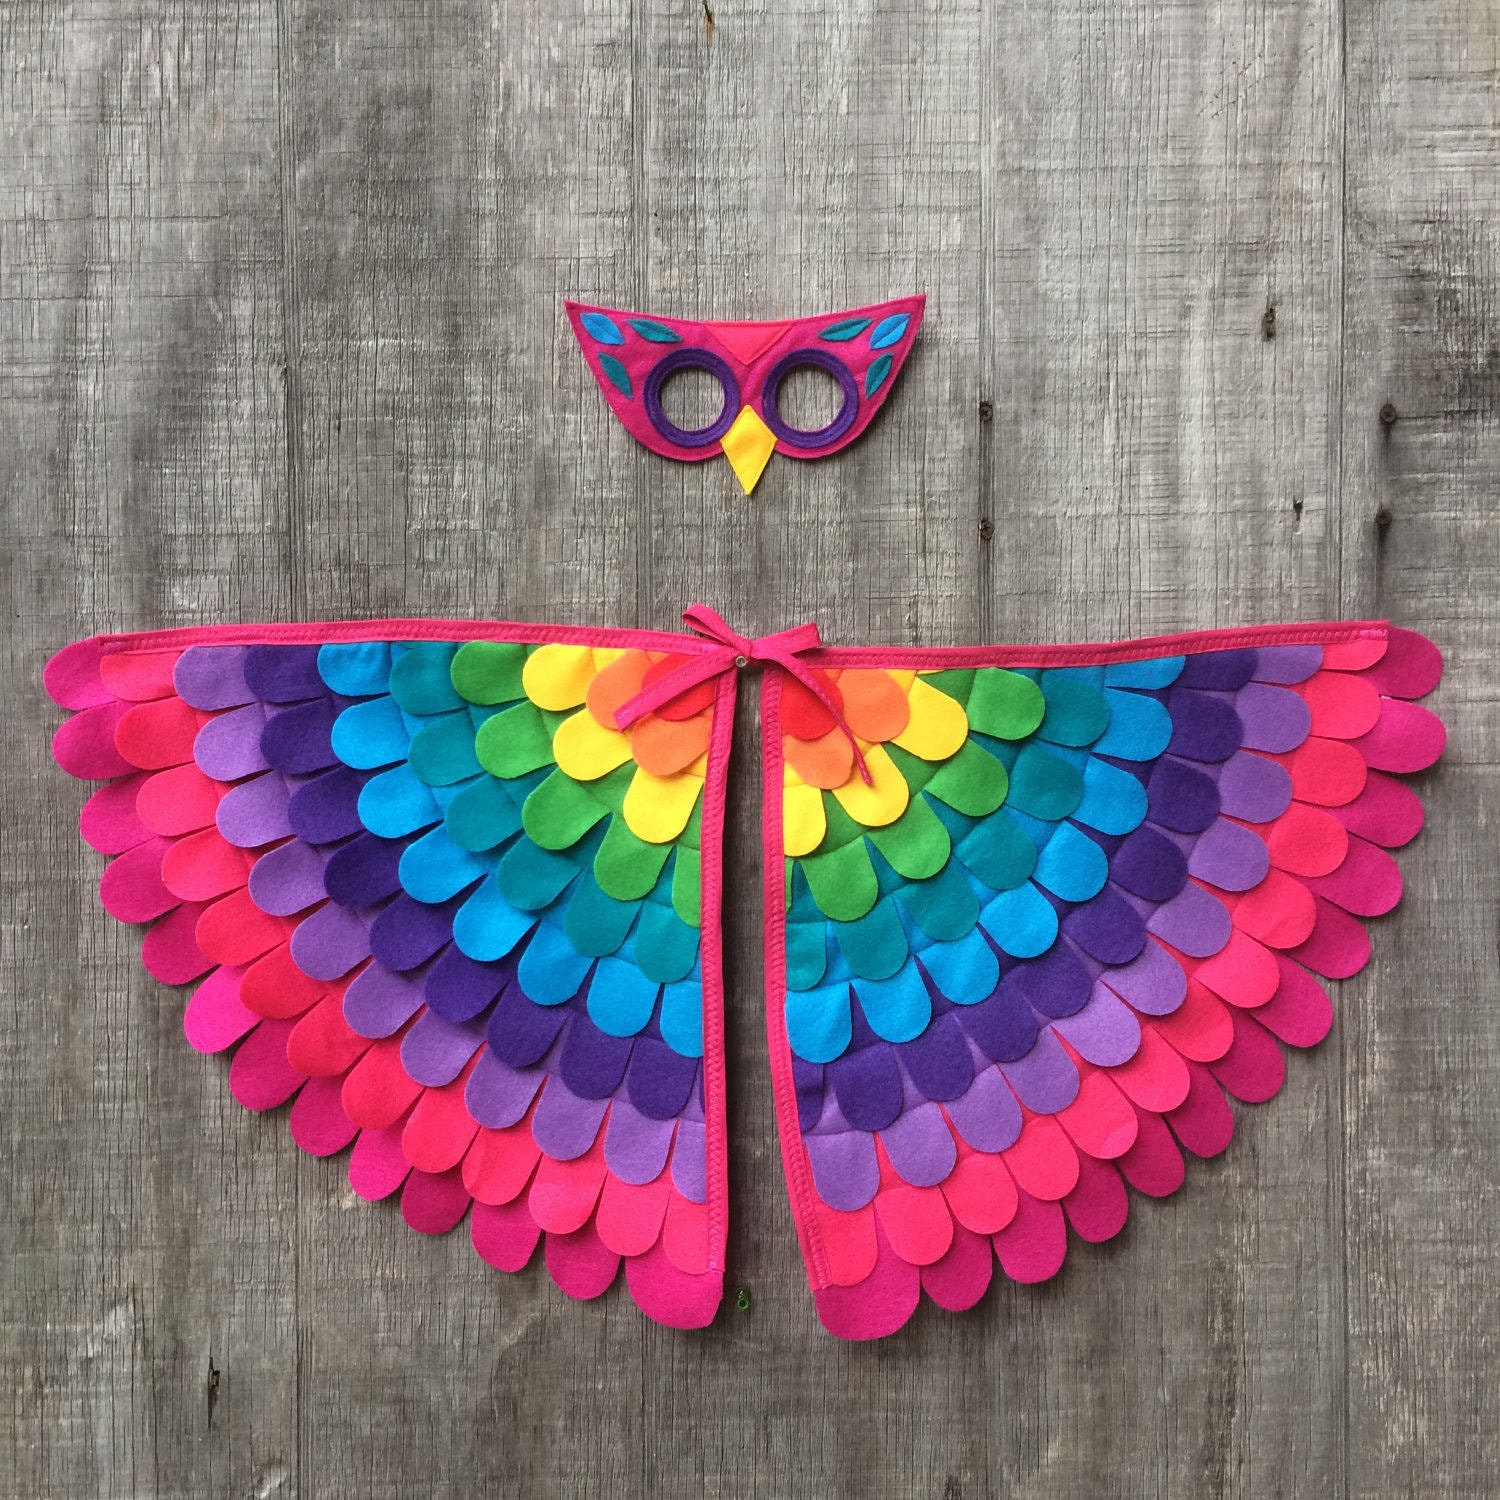 Pink Rainbow Owl Costume Set / Owl mask with fun flappable | Etsy